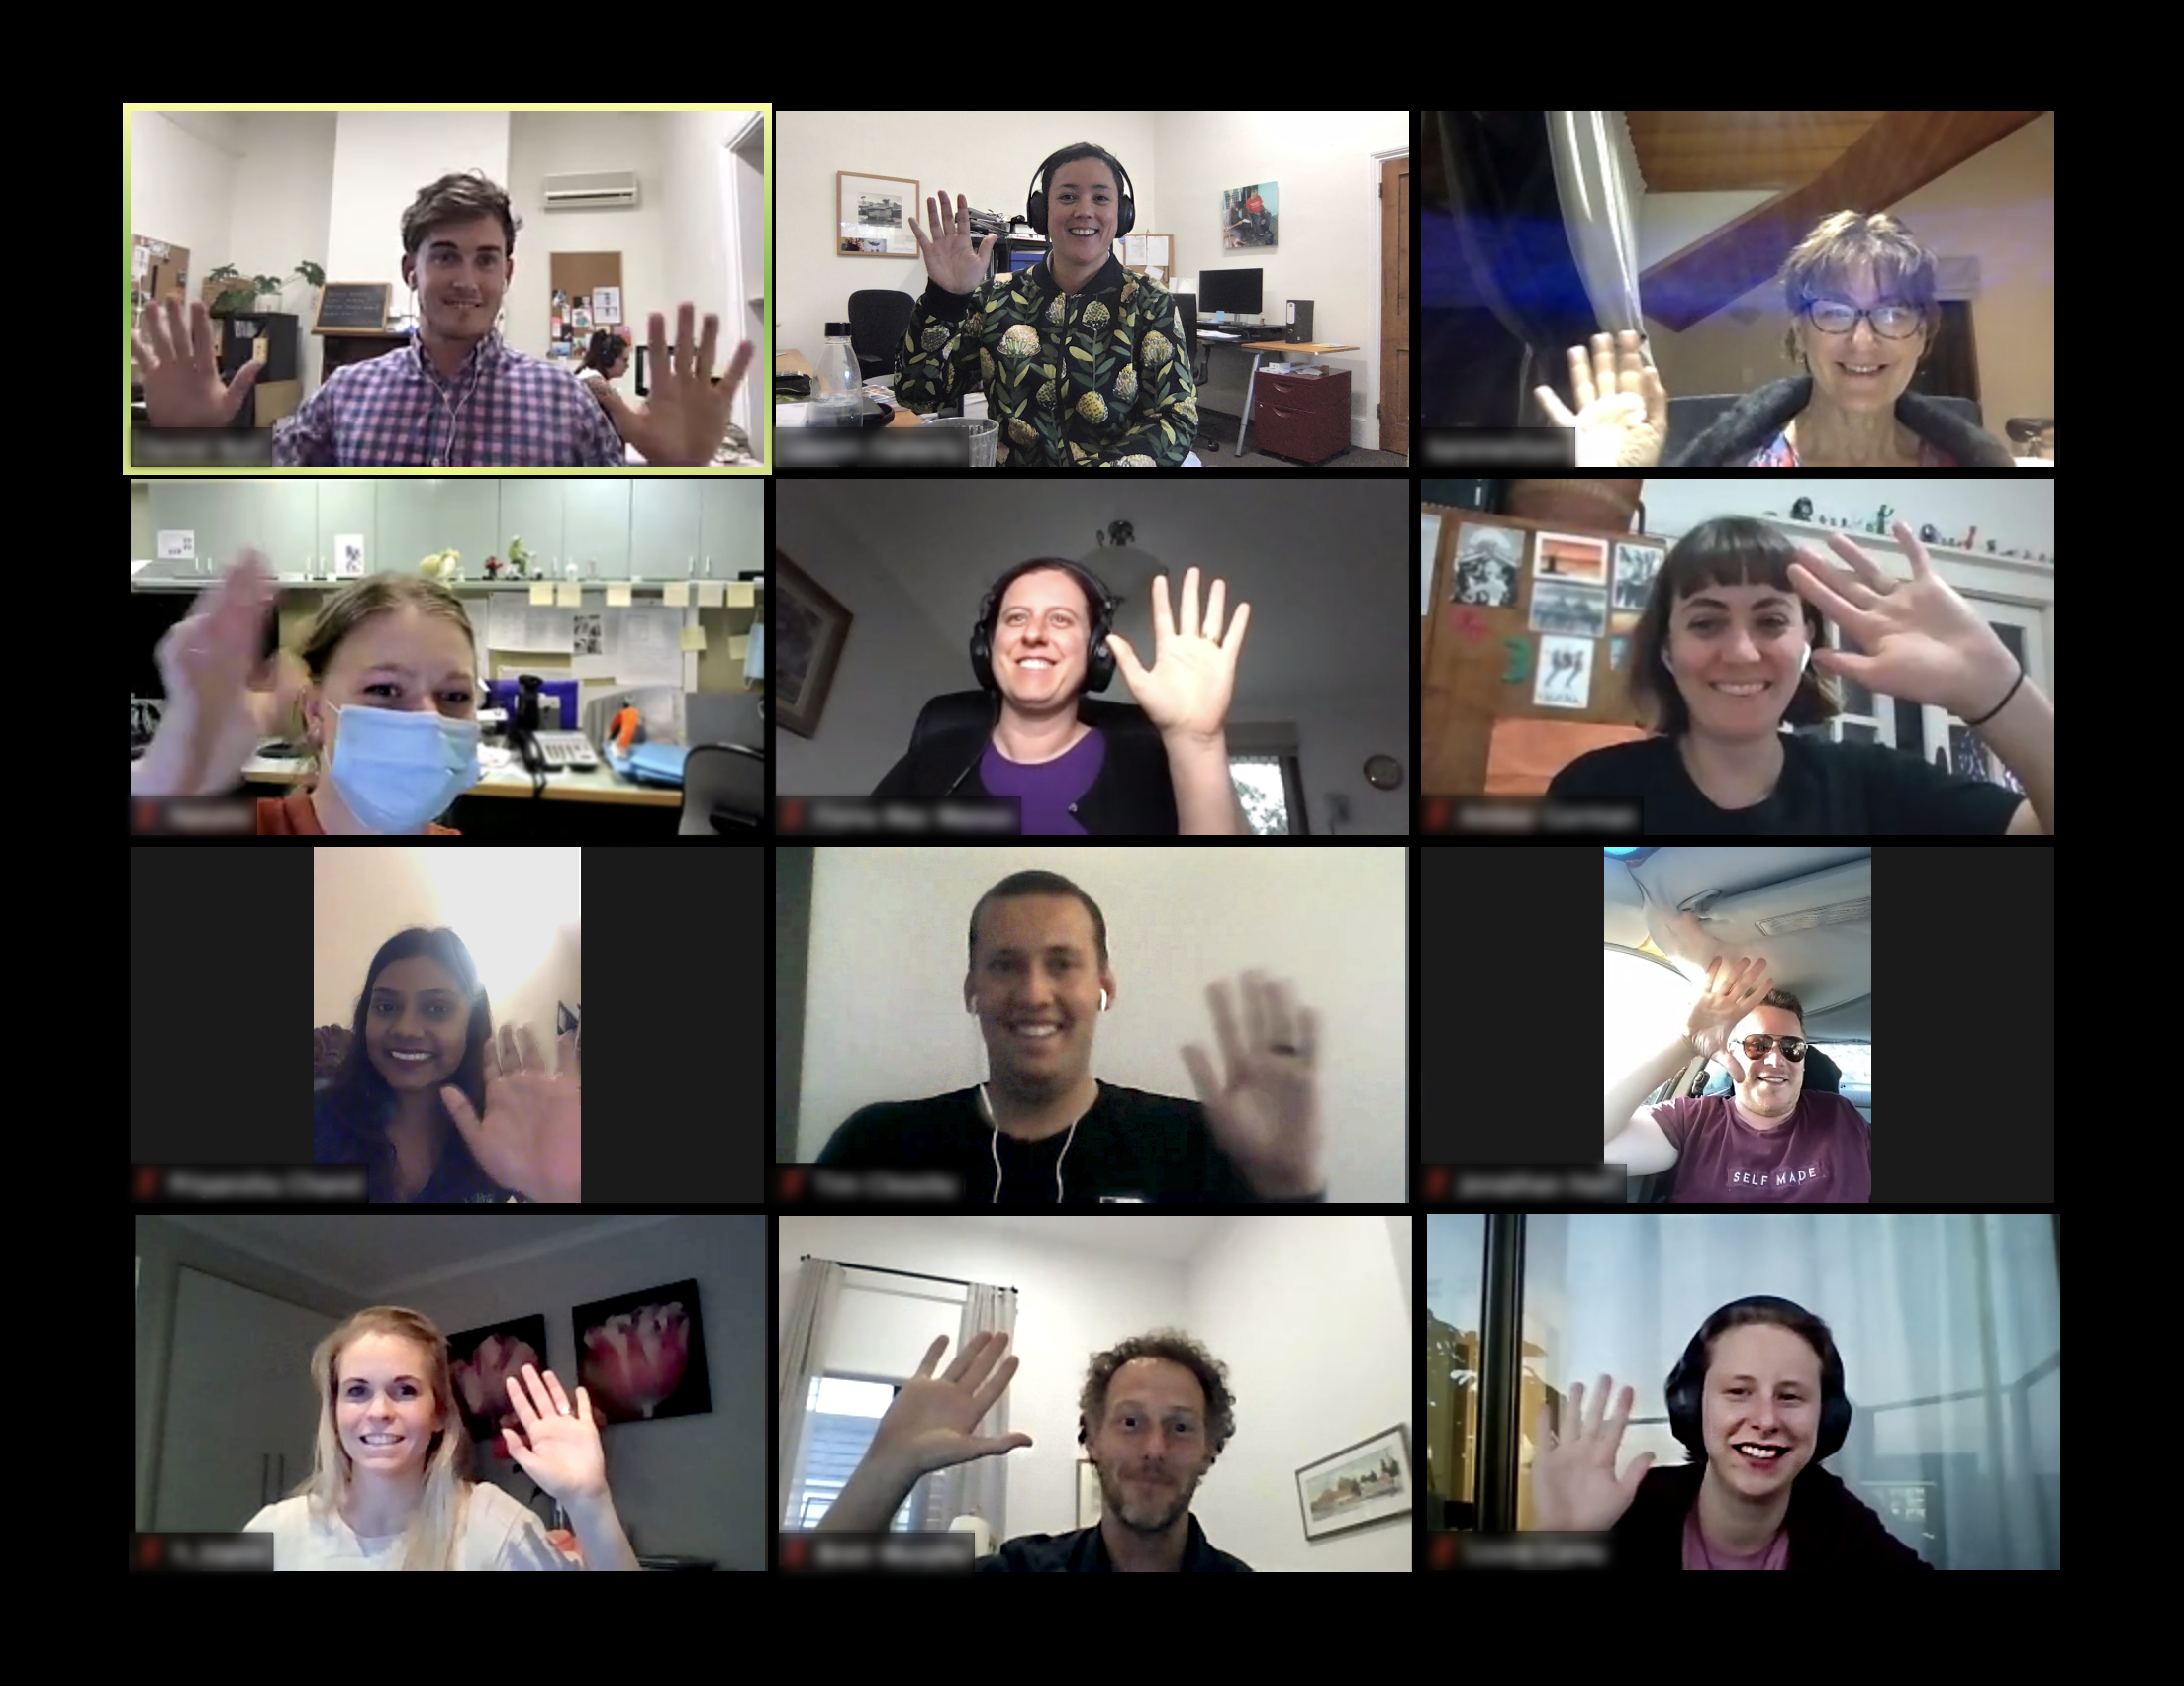 A video call with 12 people all waving at the camera.